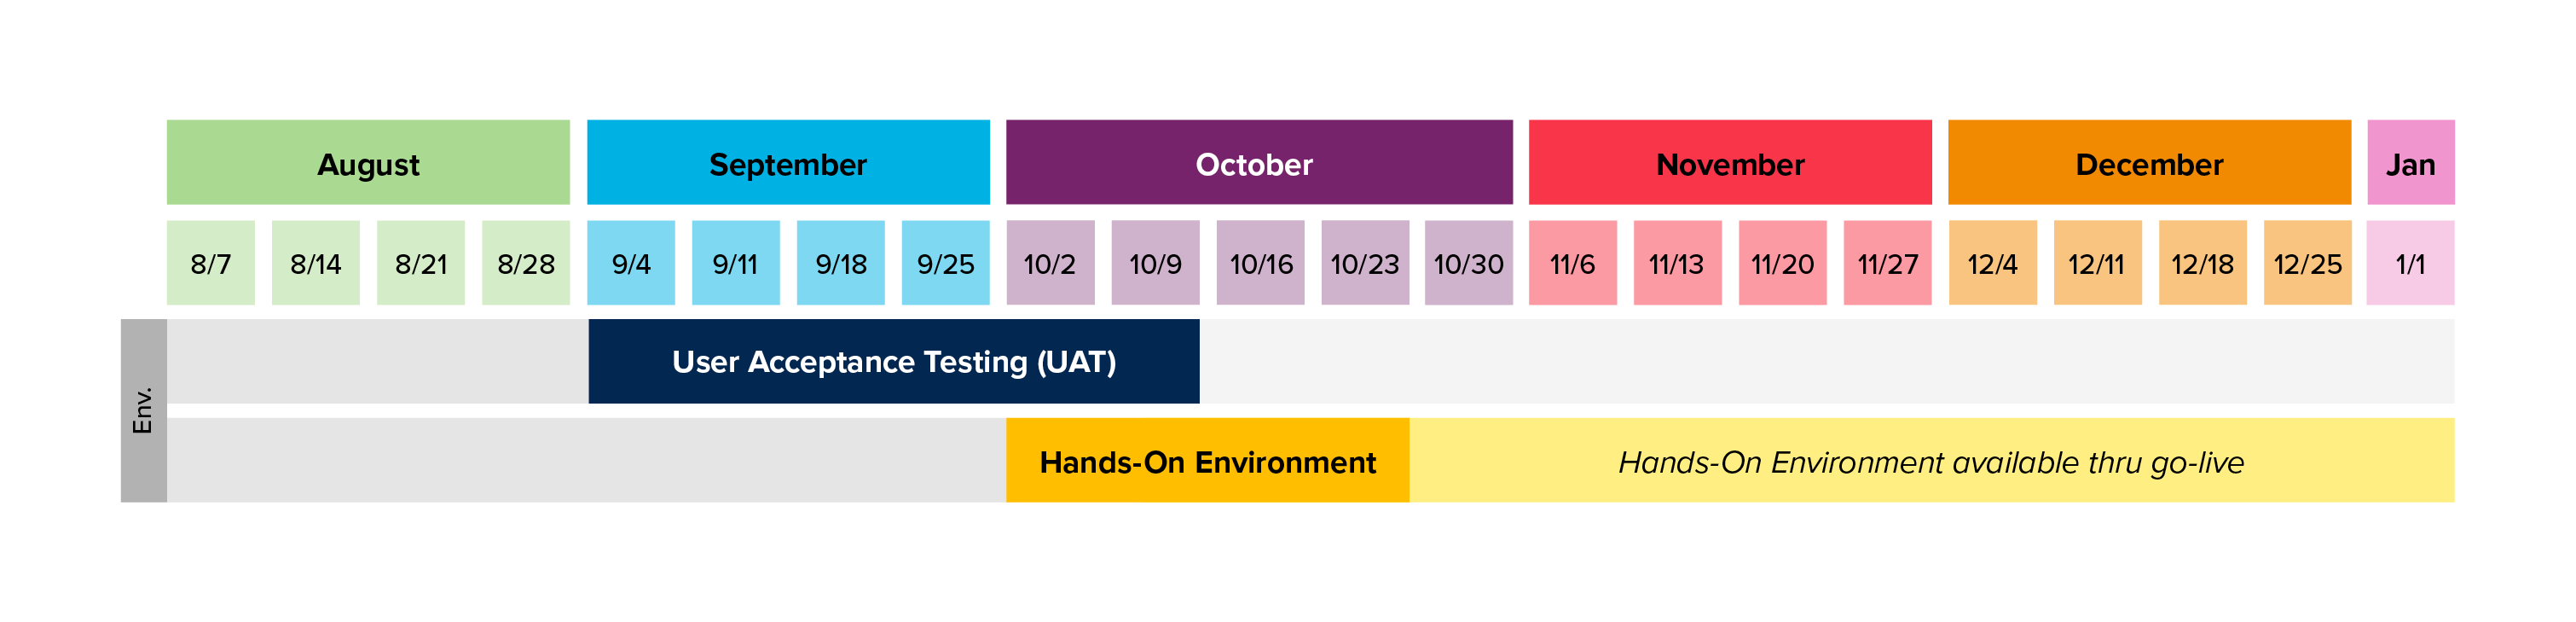 User Acceptance Testing and Hands-on Environment Timeline